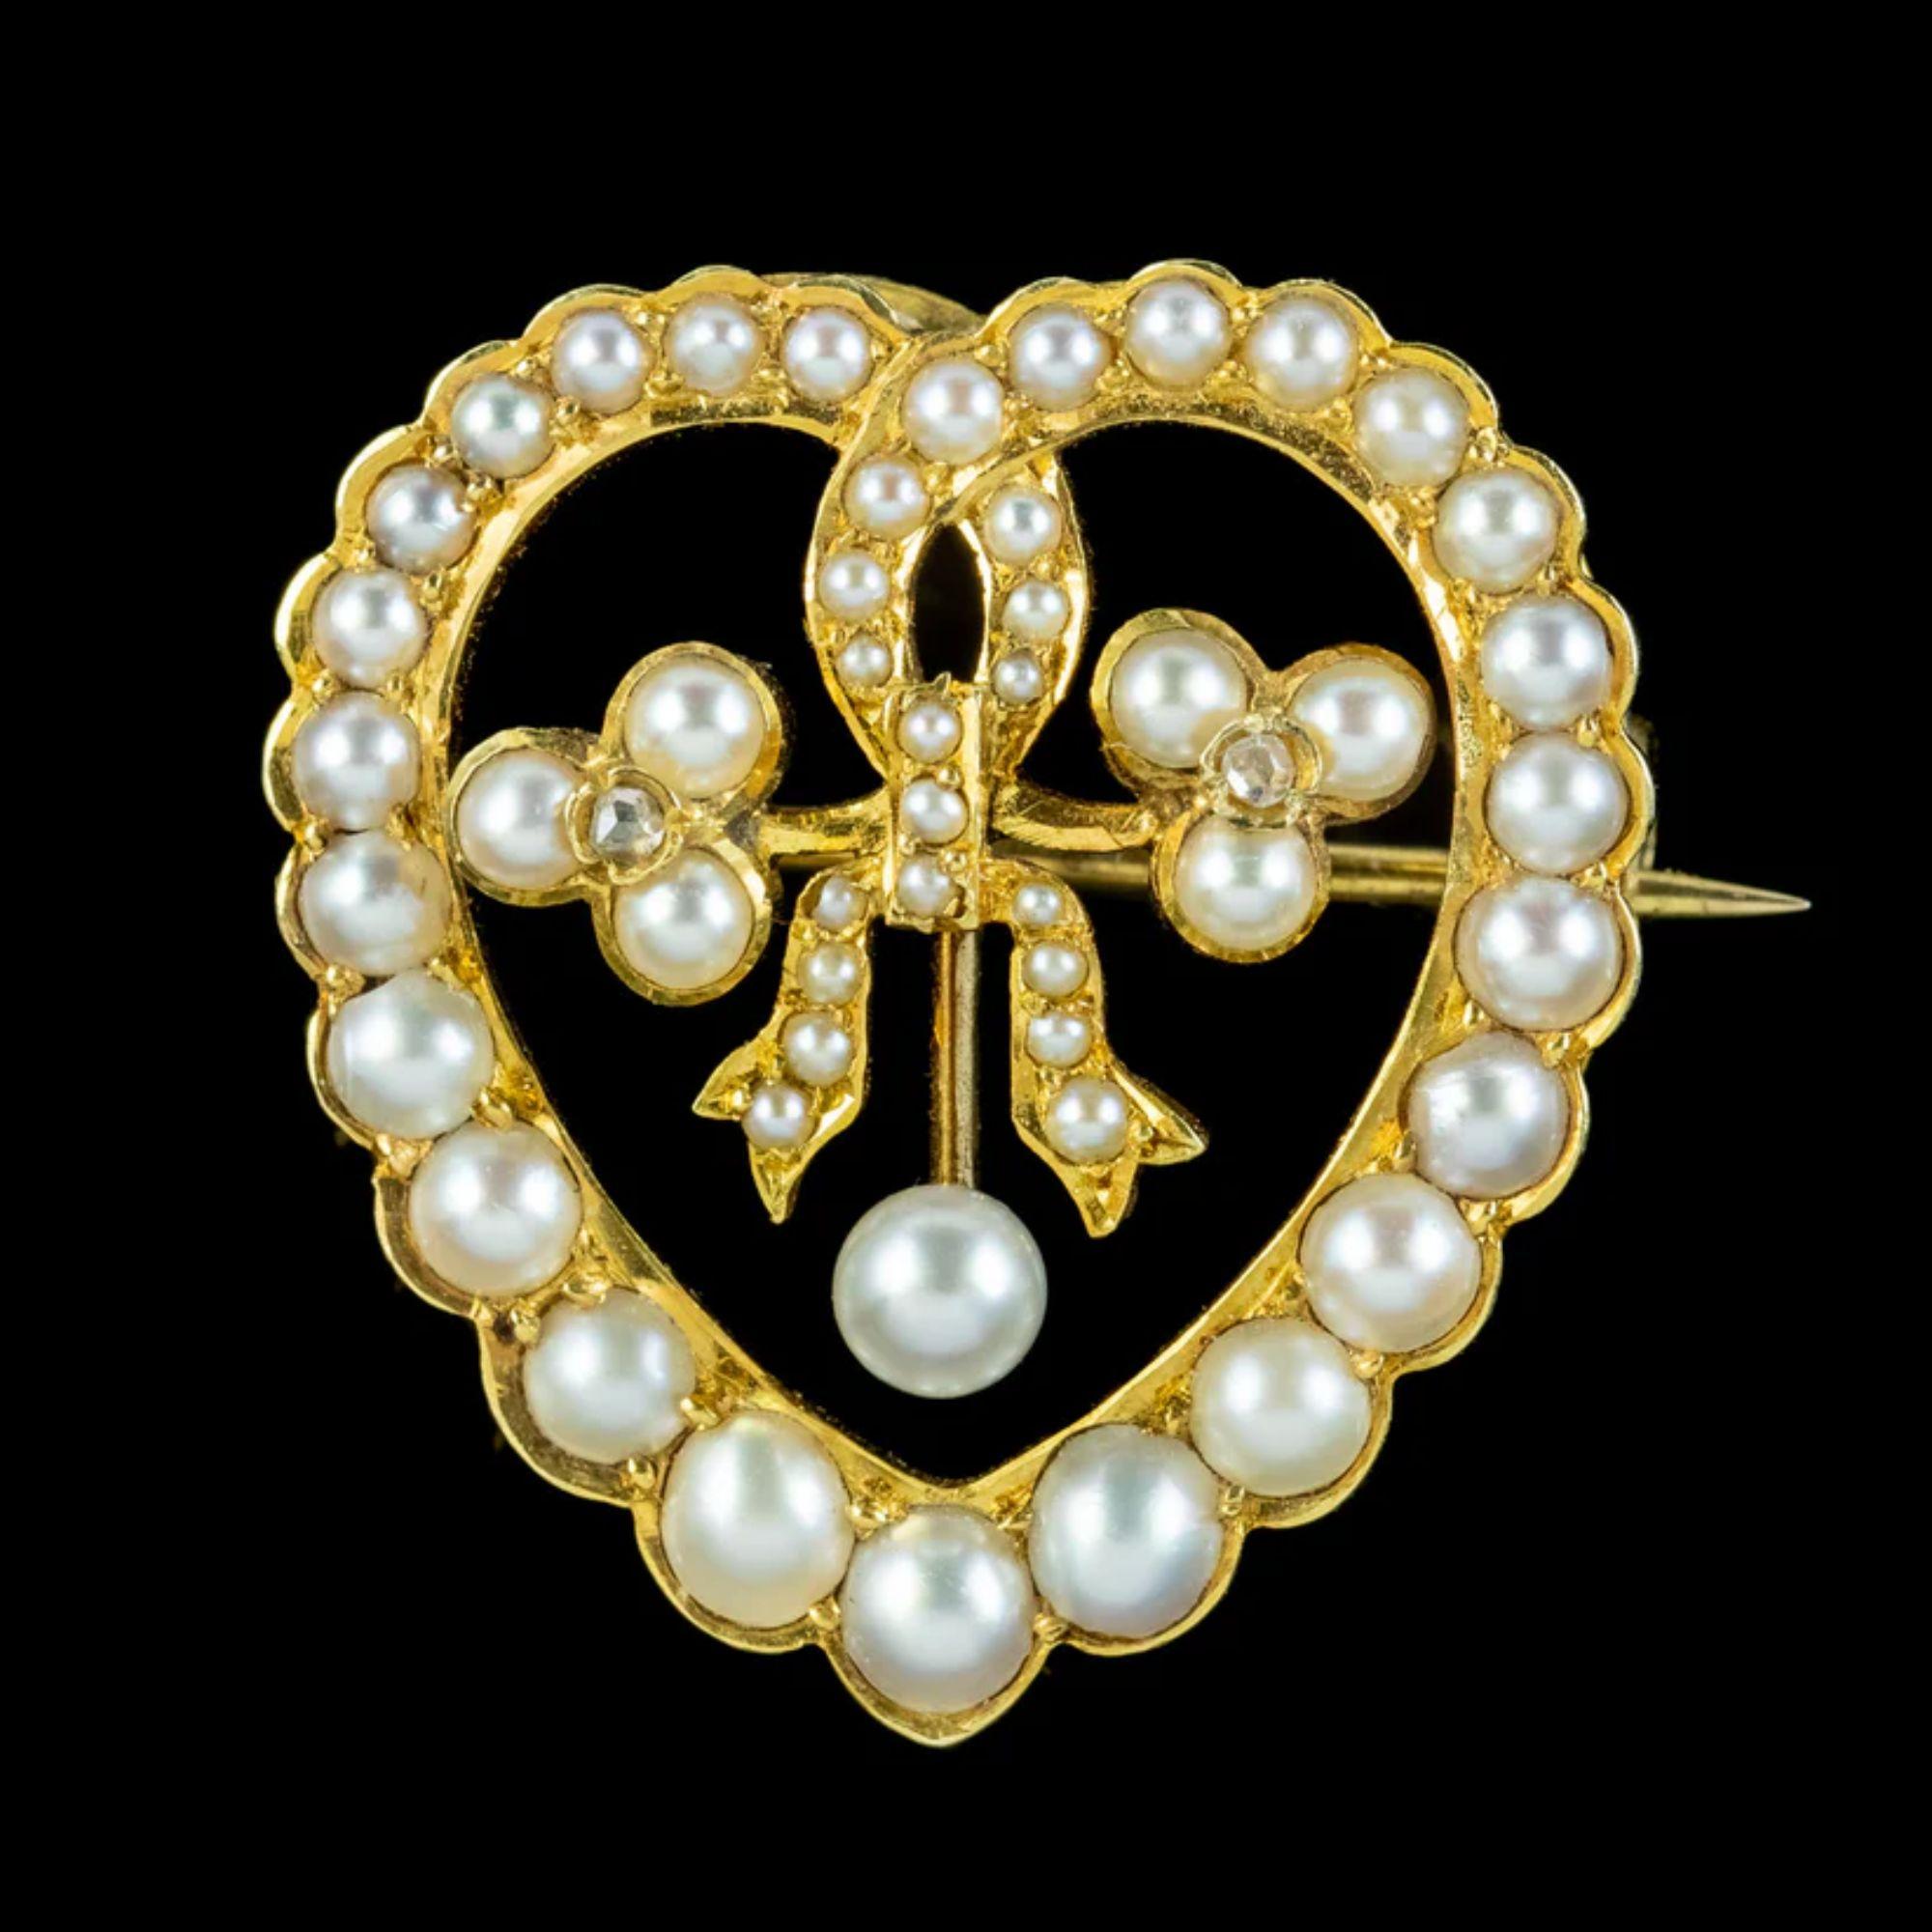 A pretty antique Edwardian brooch depicting a beautiful ribbon that loops into the shape of a heart and ties in a knot in the centre between two shamrocks. It’s lined with gleaming white pearls that graduate in size around the 15ct gold gallery with